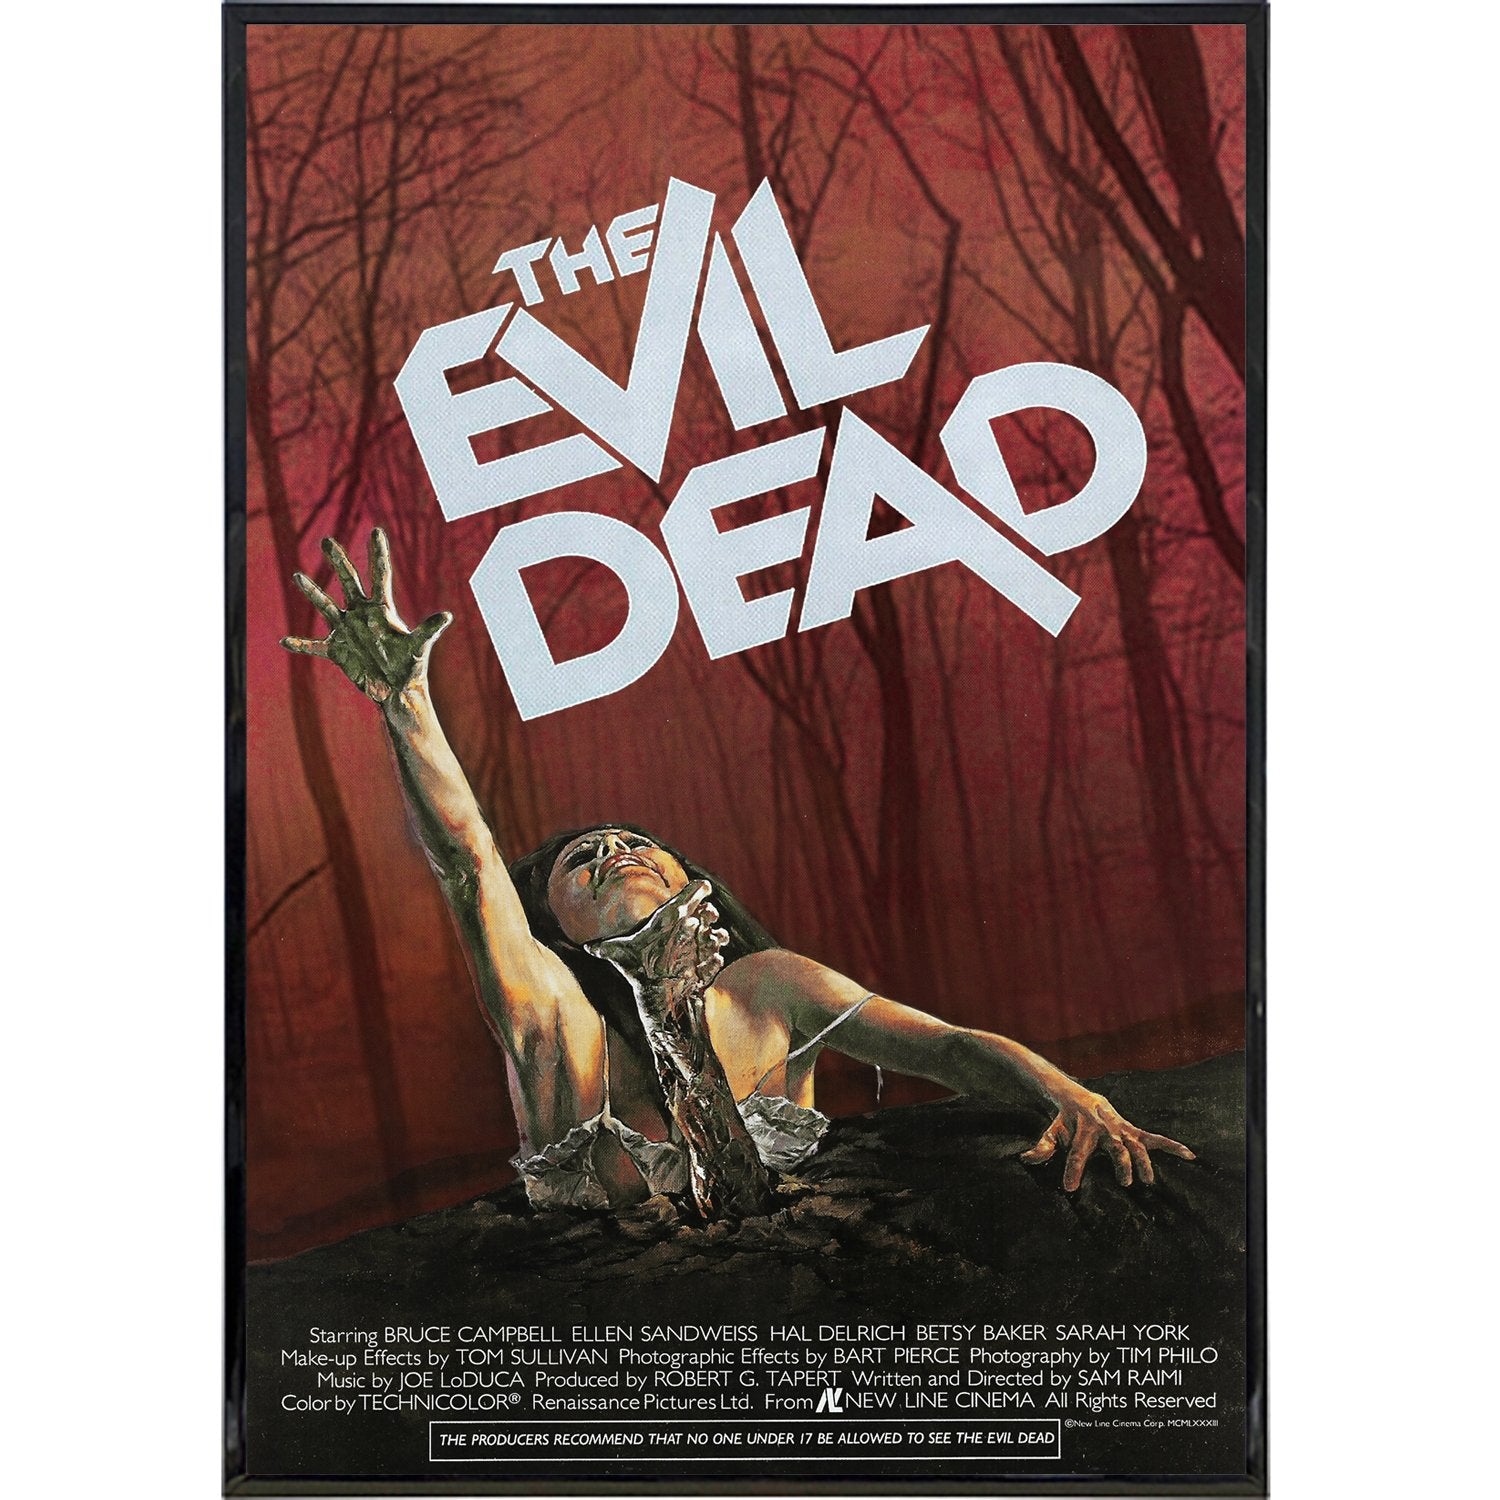 What chainsaw did that movie use? – Evil Dead Series (1981